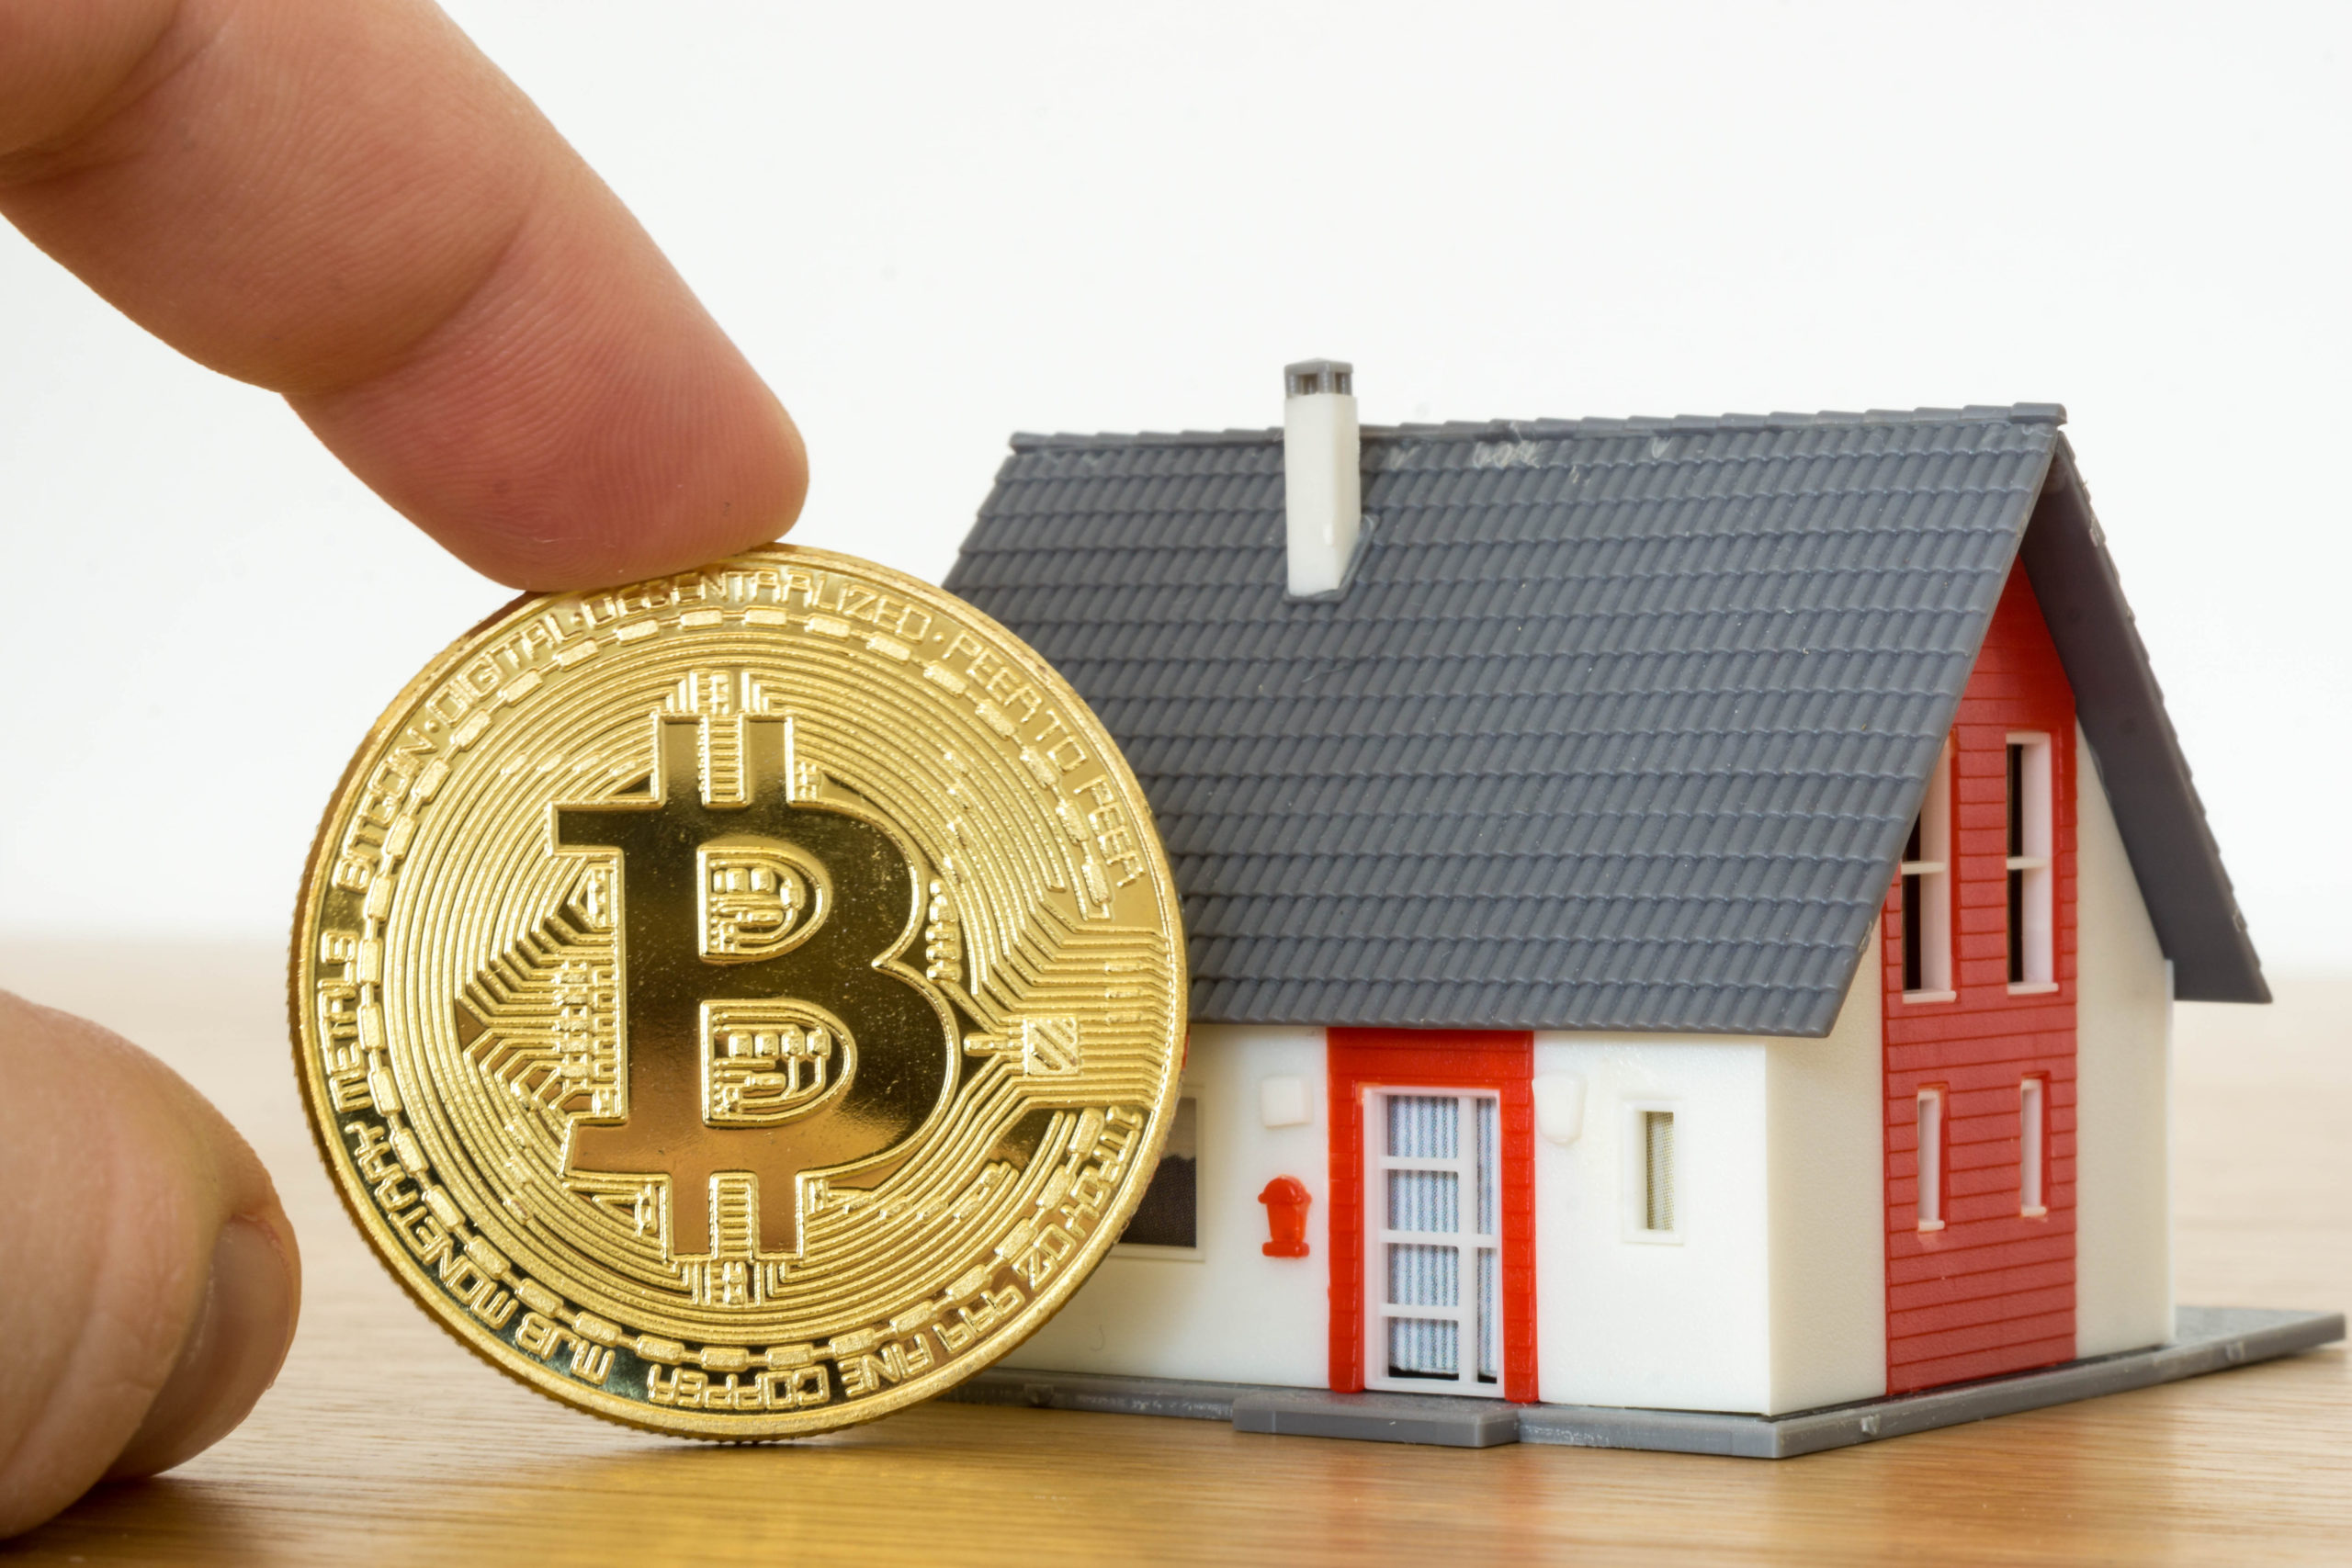 Realtor dismisses Bitcoin as a hedge asset and says crypto carnage is good for property